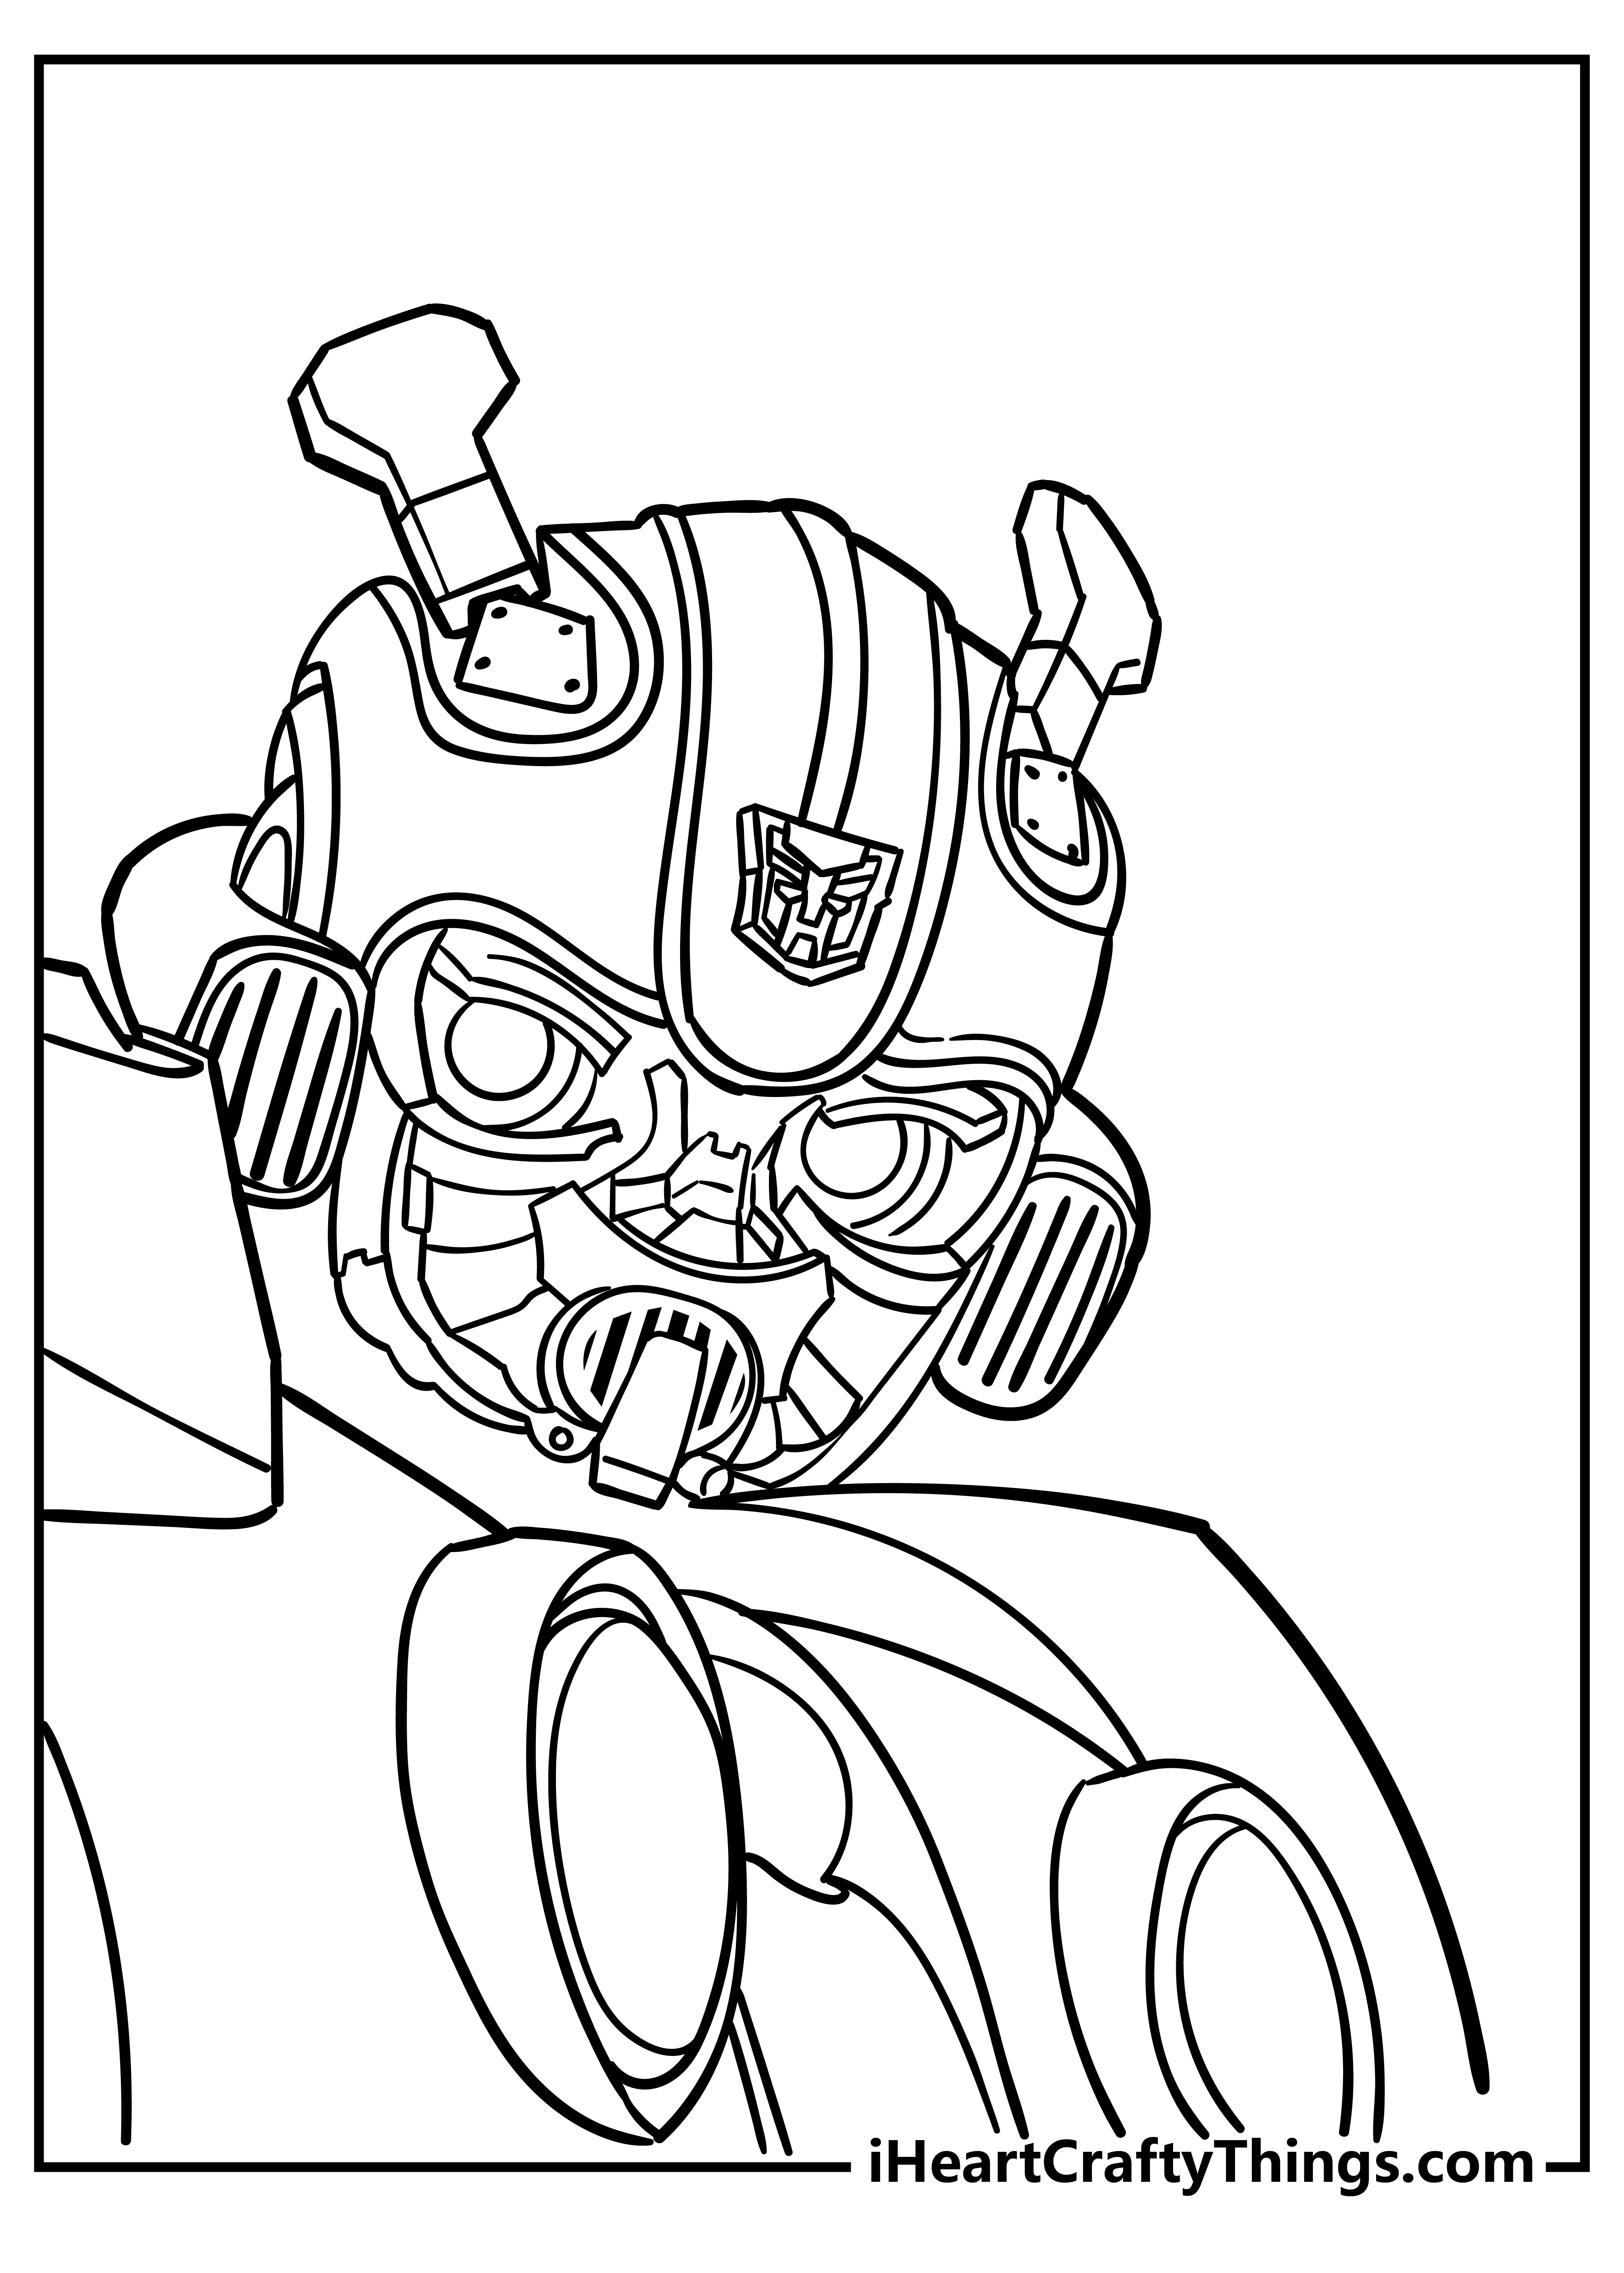 Bumblebee Coloring Pages for kids free download